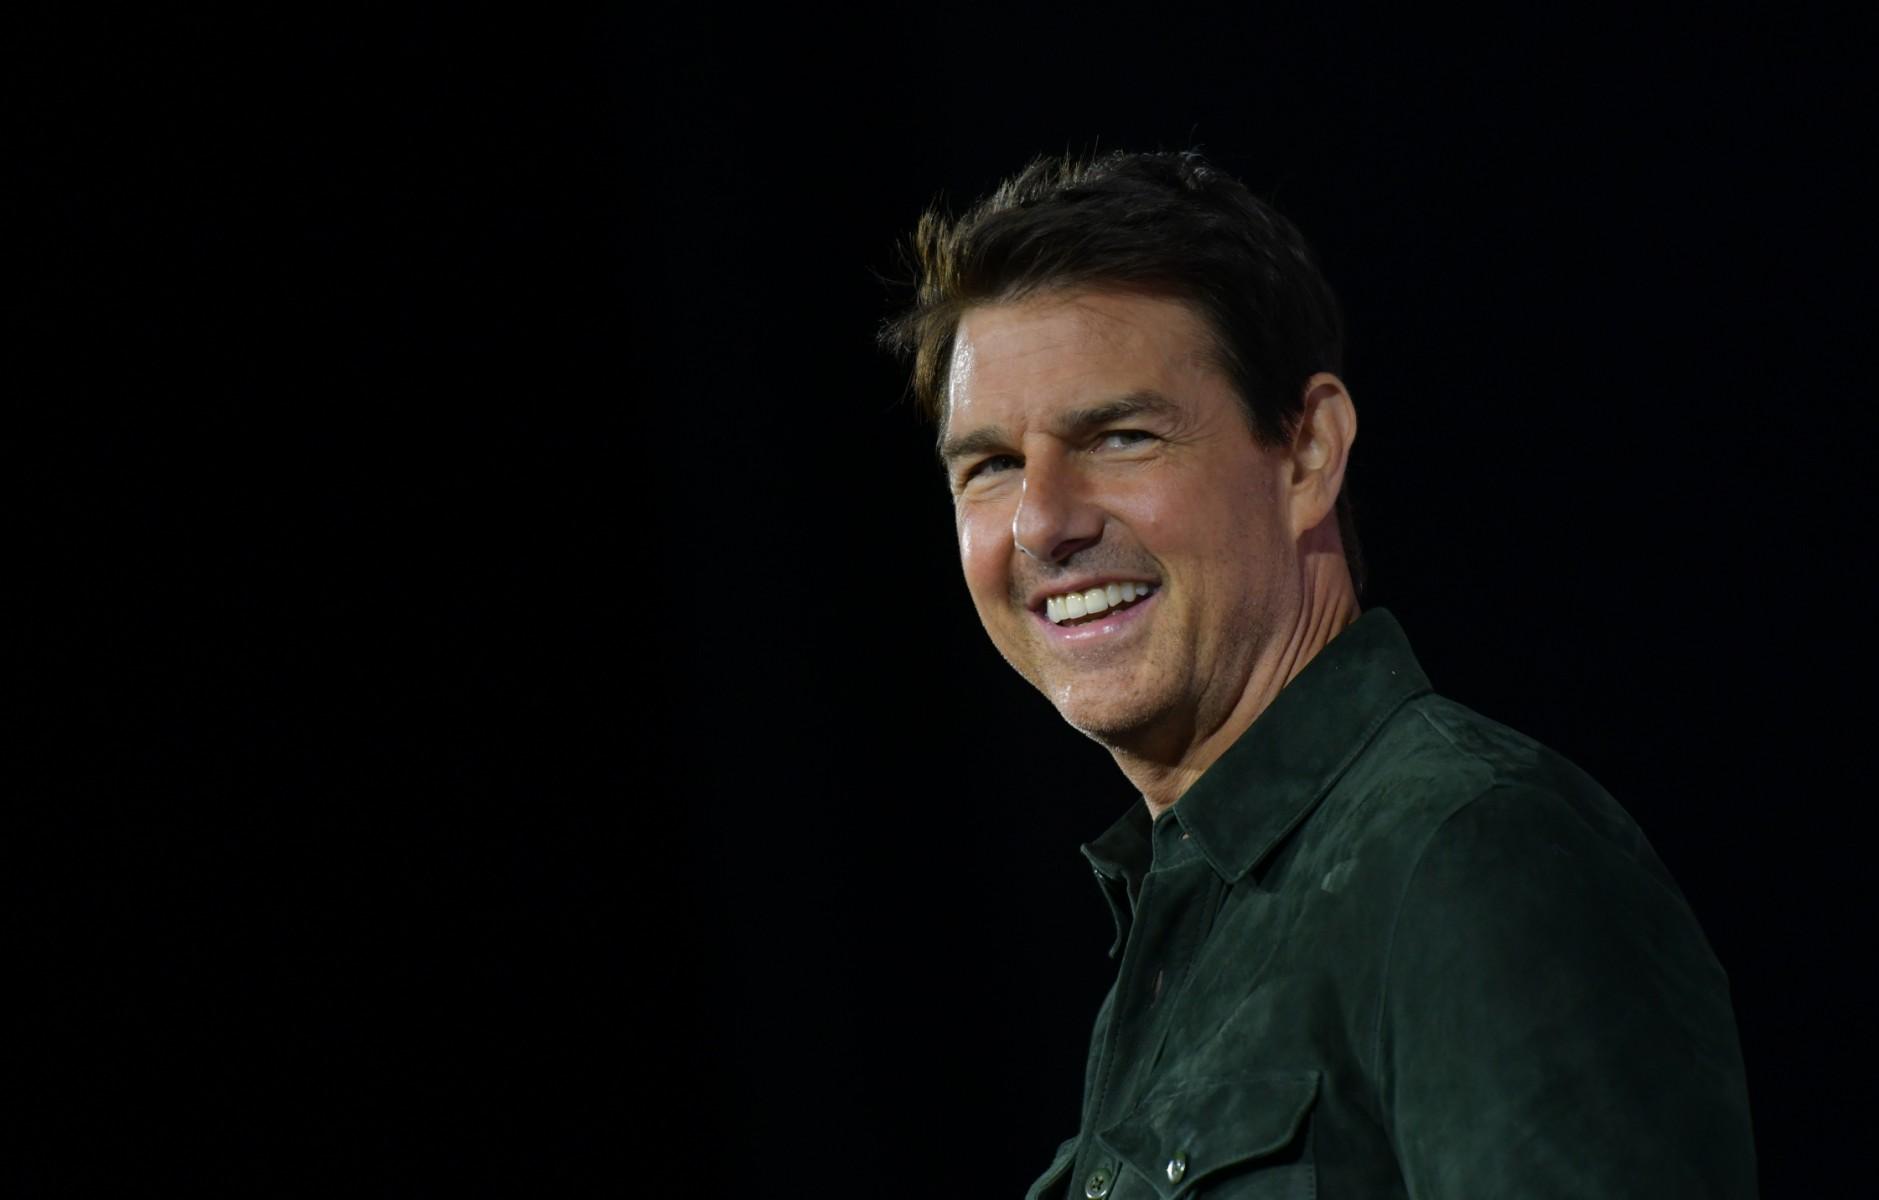 In this file photo taken on July 18, 2019, actor Tom Cruise makes a surprise appearance to promote 'Top Gun: Maverick' at the Convention Center during Comic Con in San Diego, California. Photo: AFP